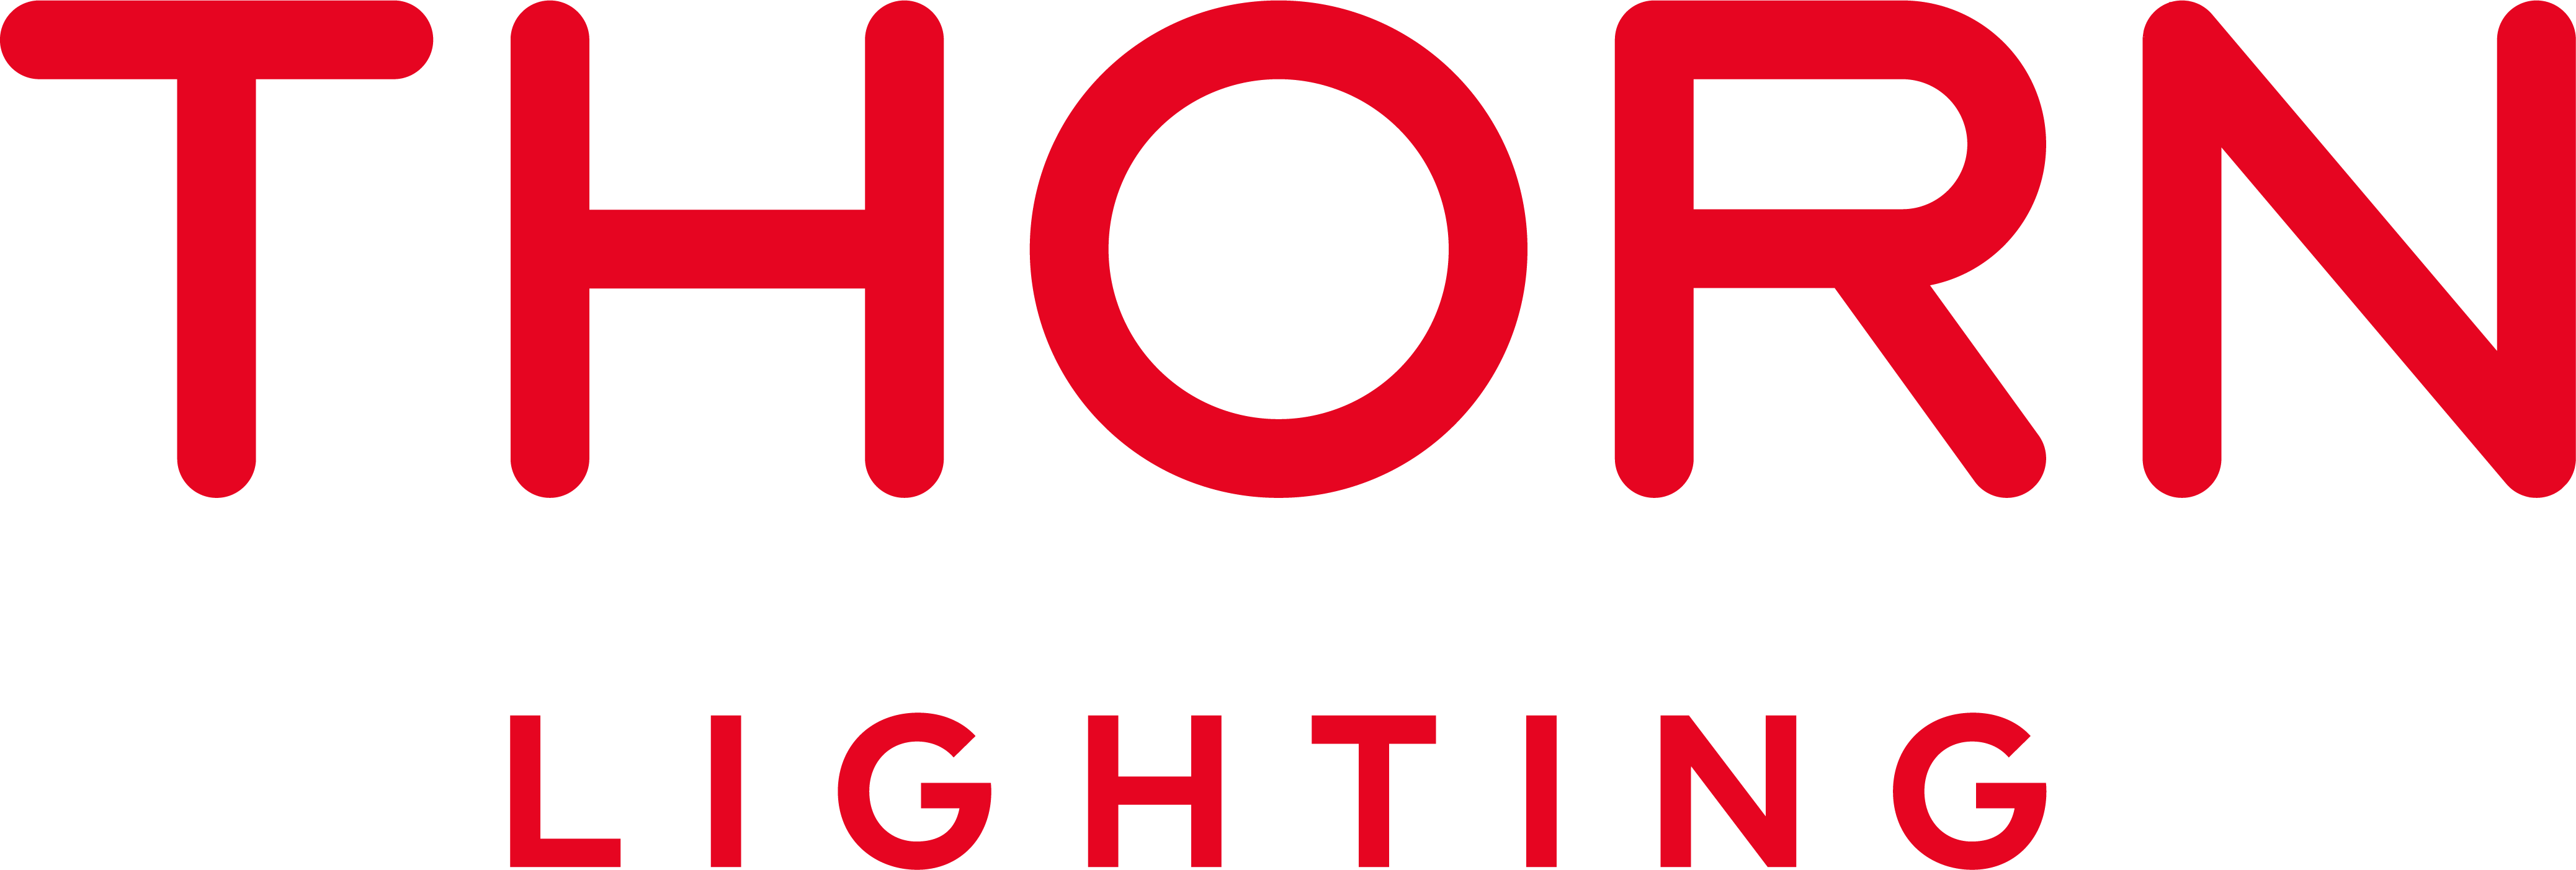 Welcome the Thorn Lighting website — English